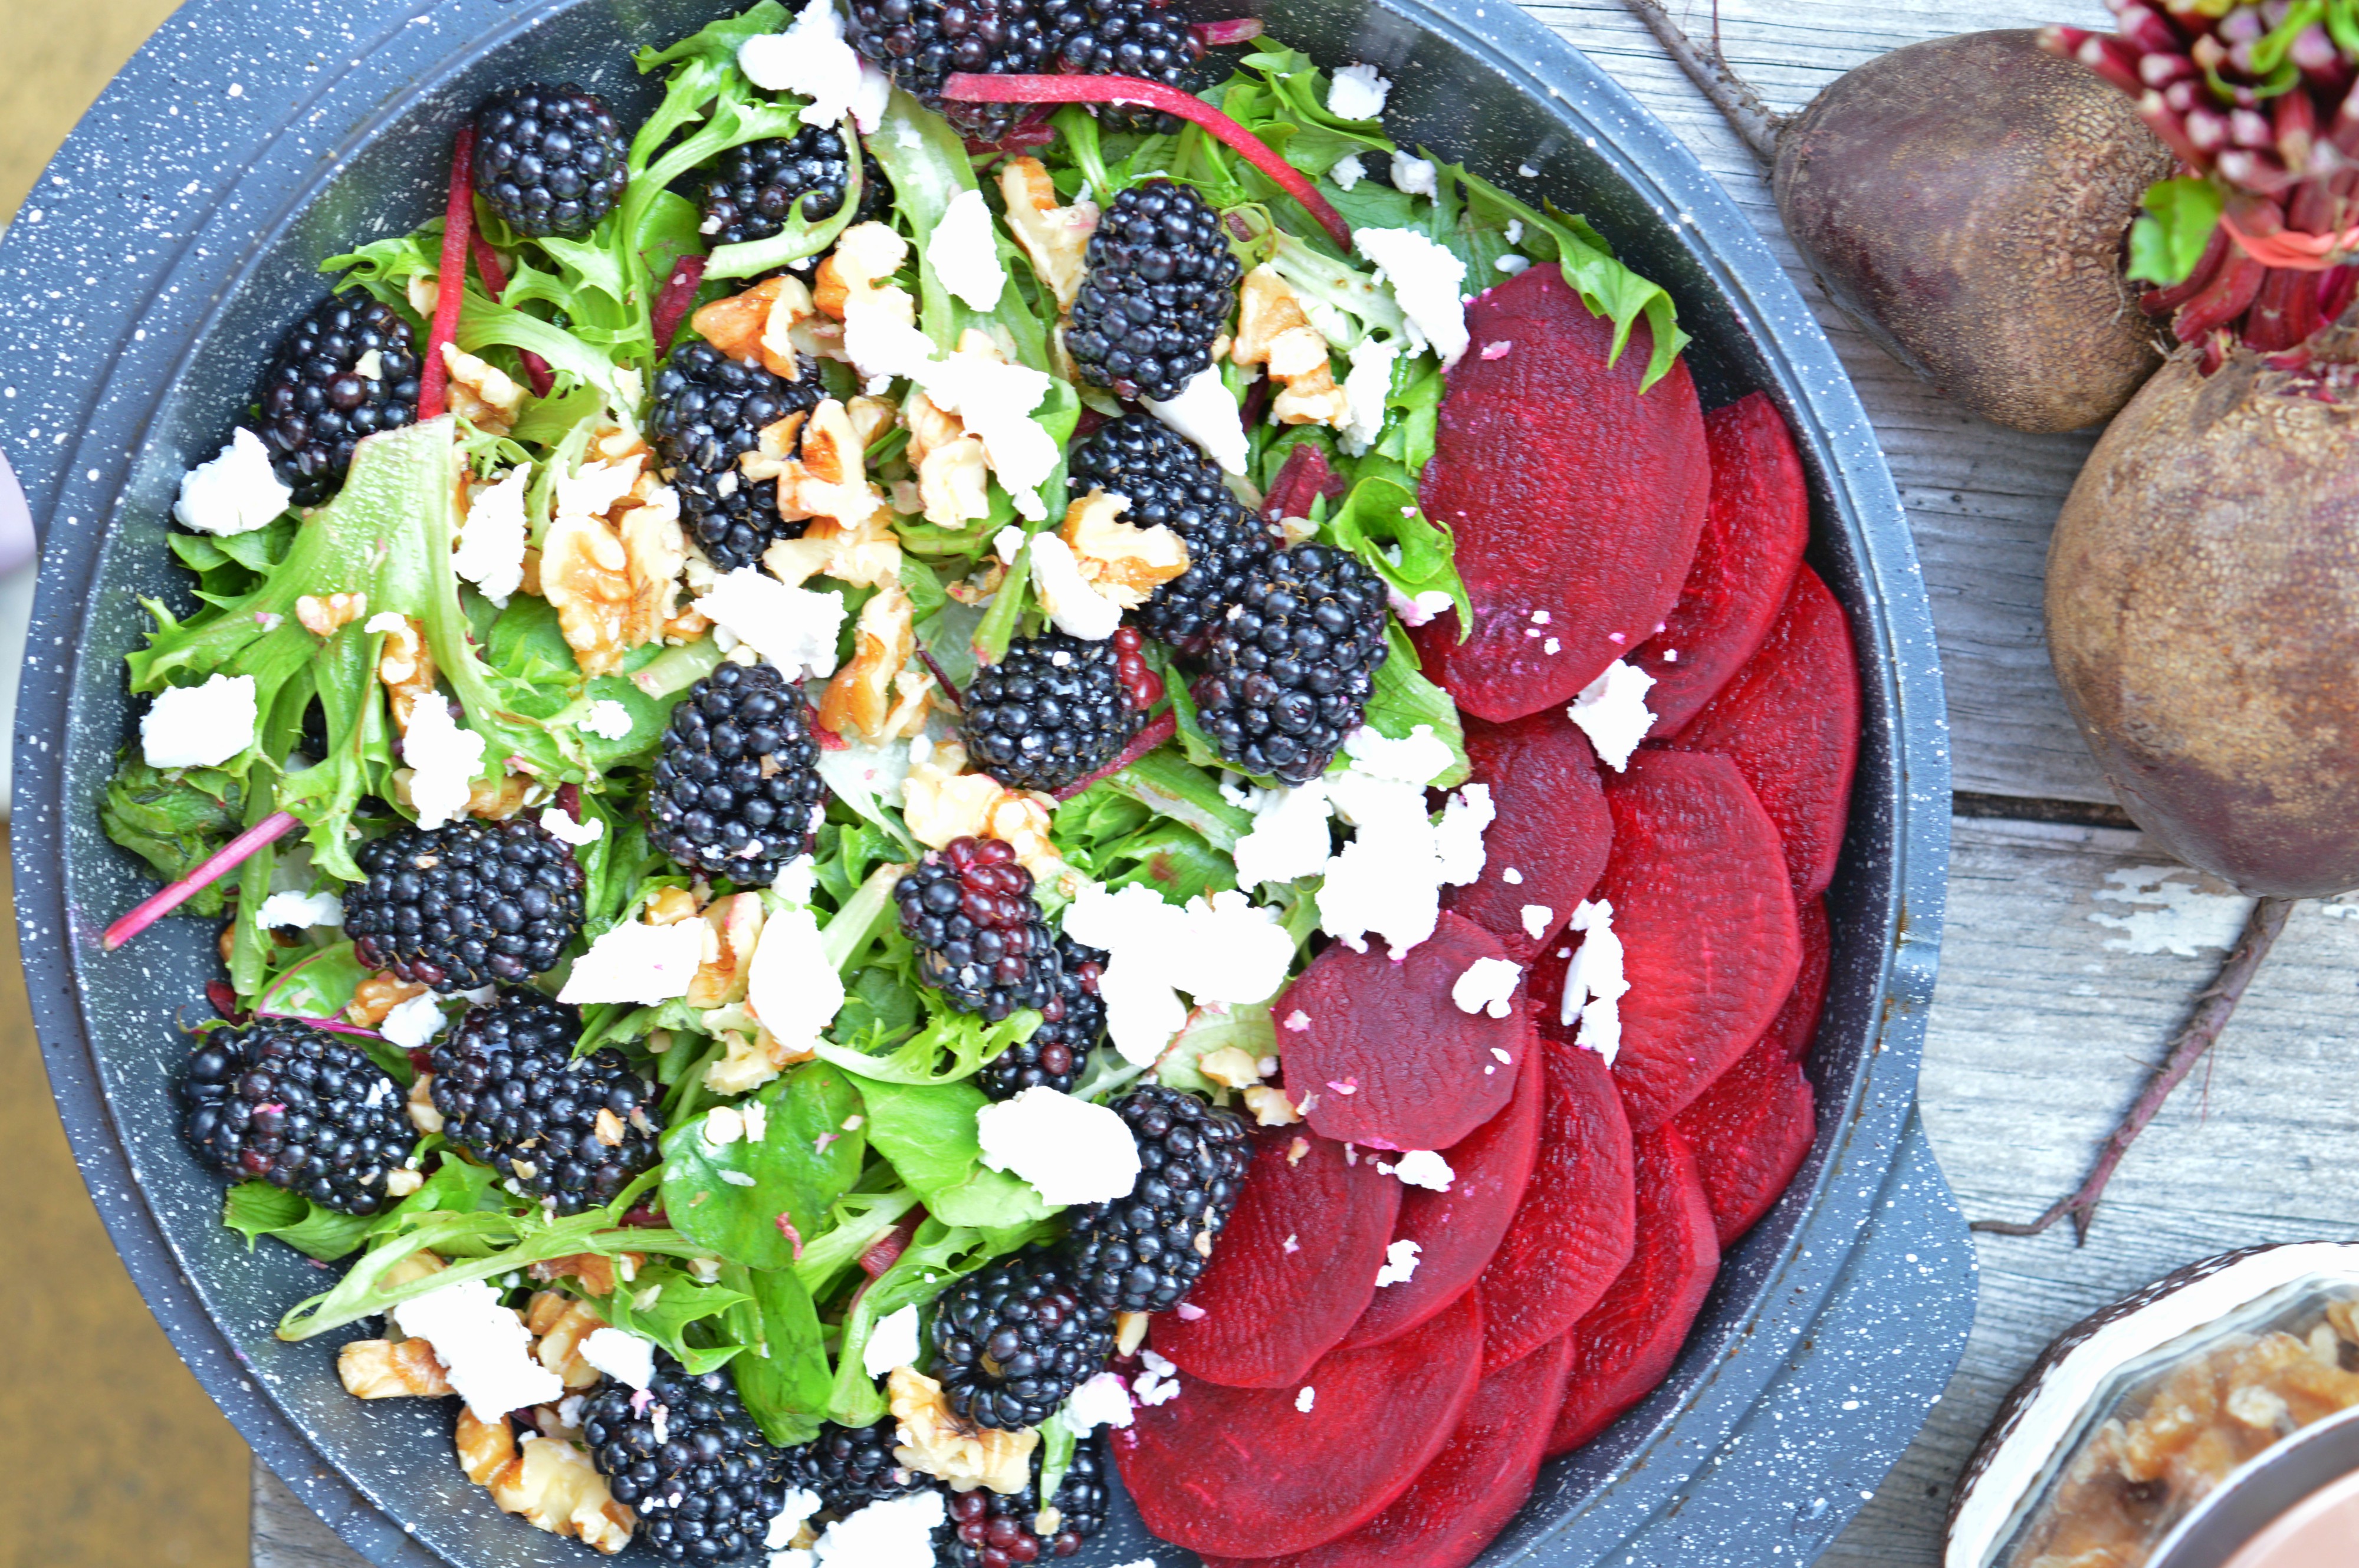 “Healthy and Delicious: Blackberry and Goat Cheese Salad Recipe”